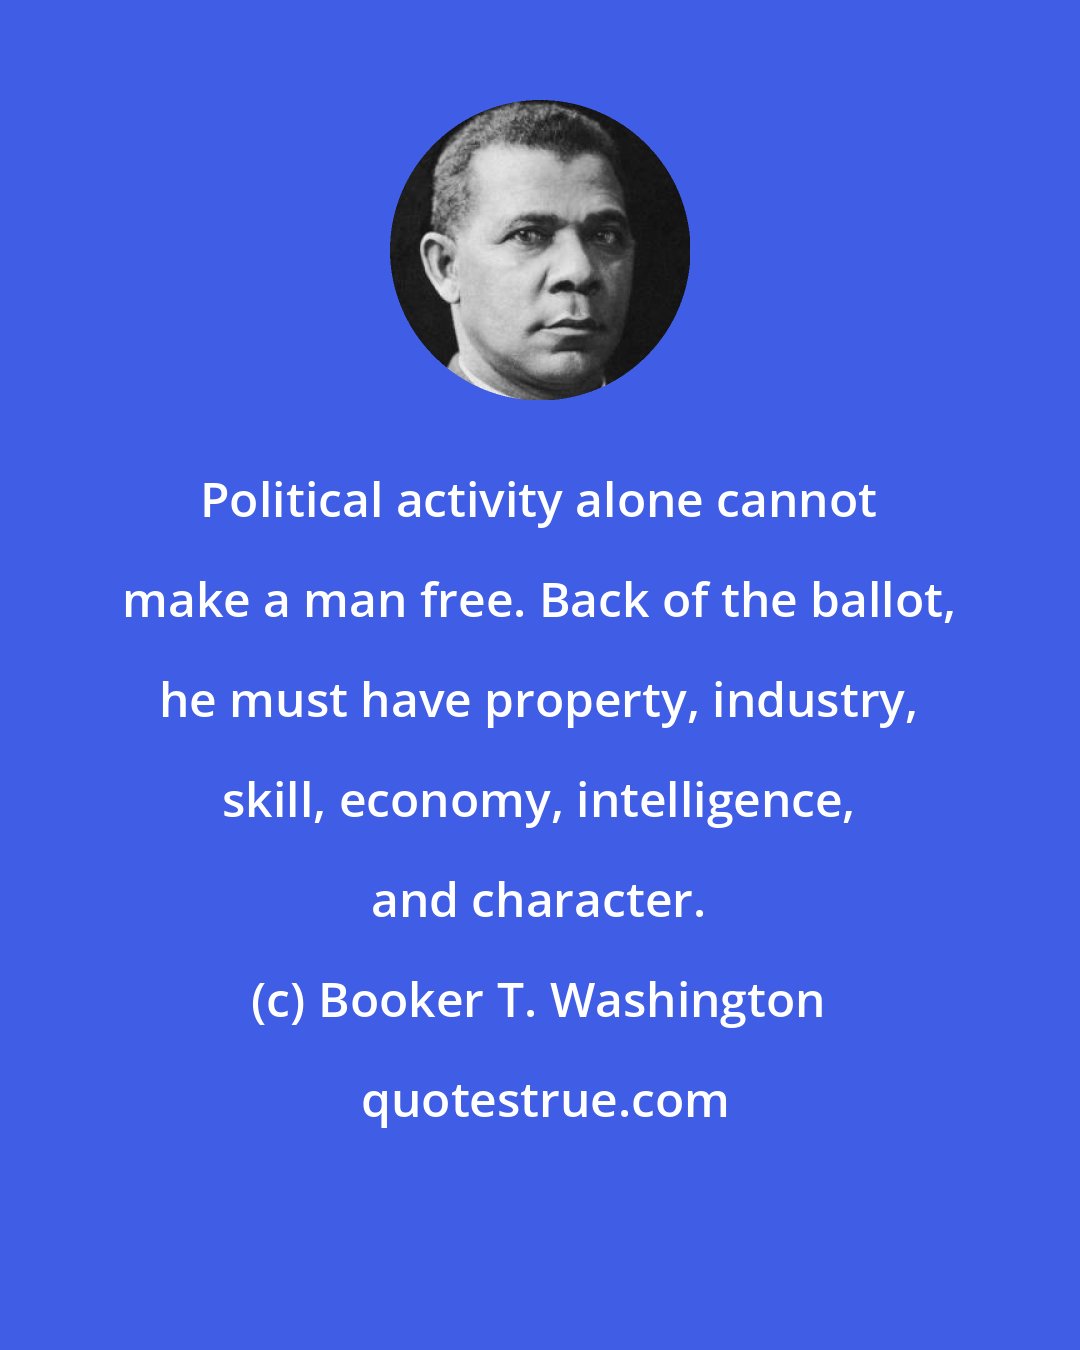 Booker T. Washington: Political activity alone cannot make a man free. Back of the ballot, he must have property, industry, skill, economy, intelligence, and character.